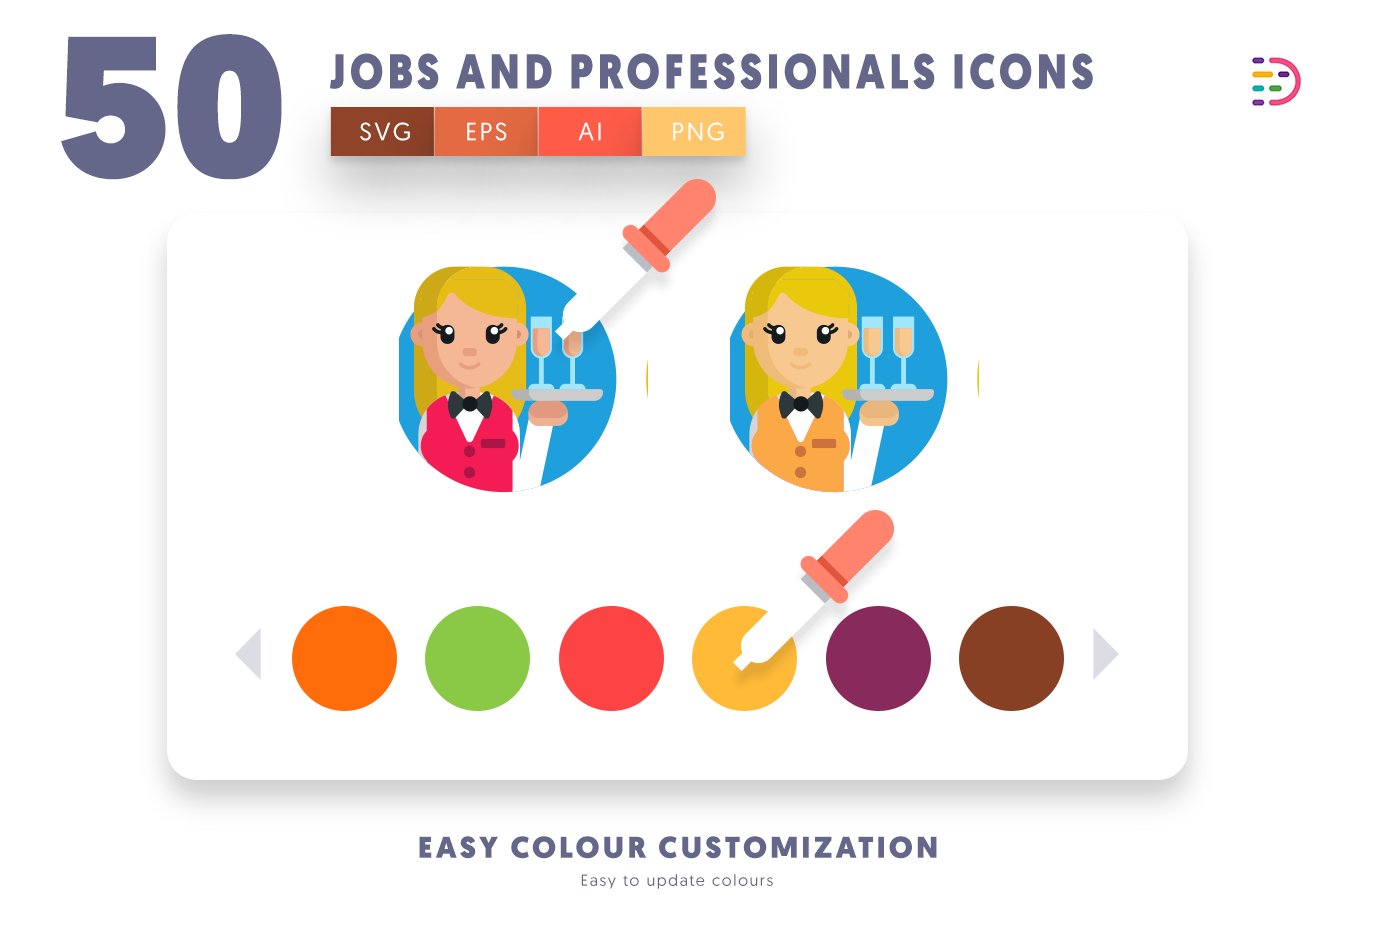 jobandprofessionals icons cover 7 936